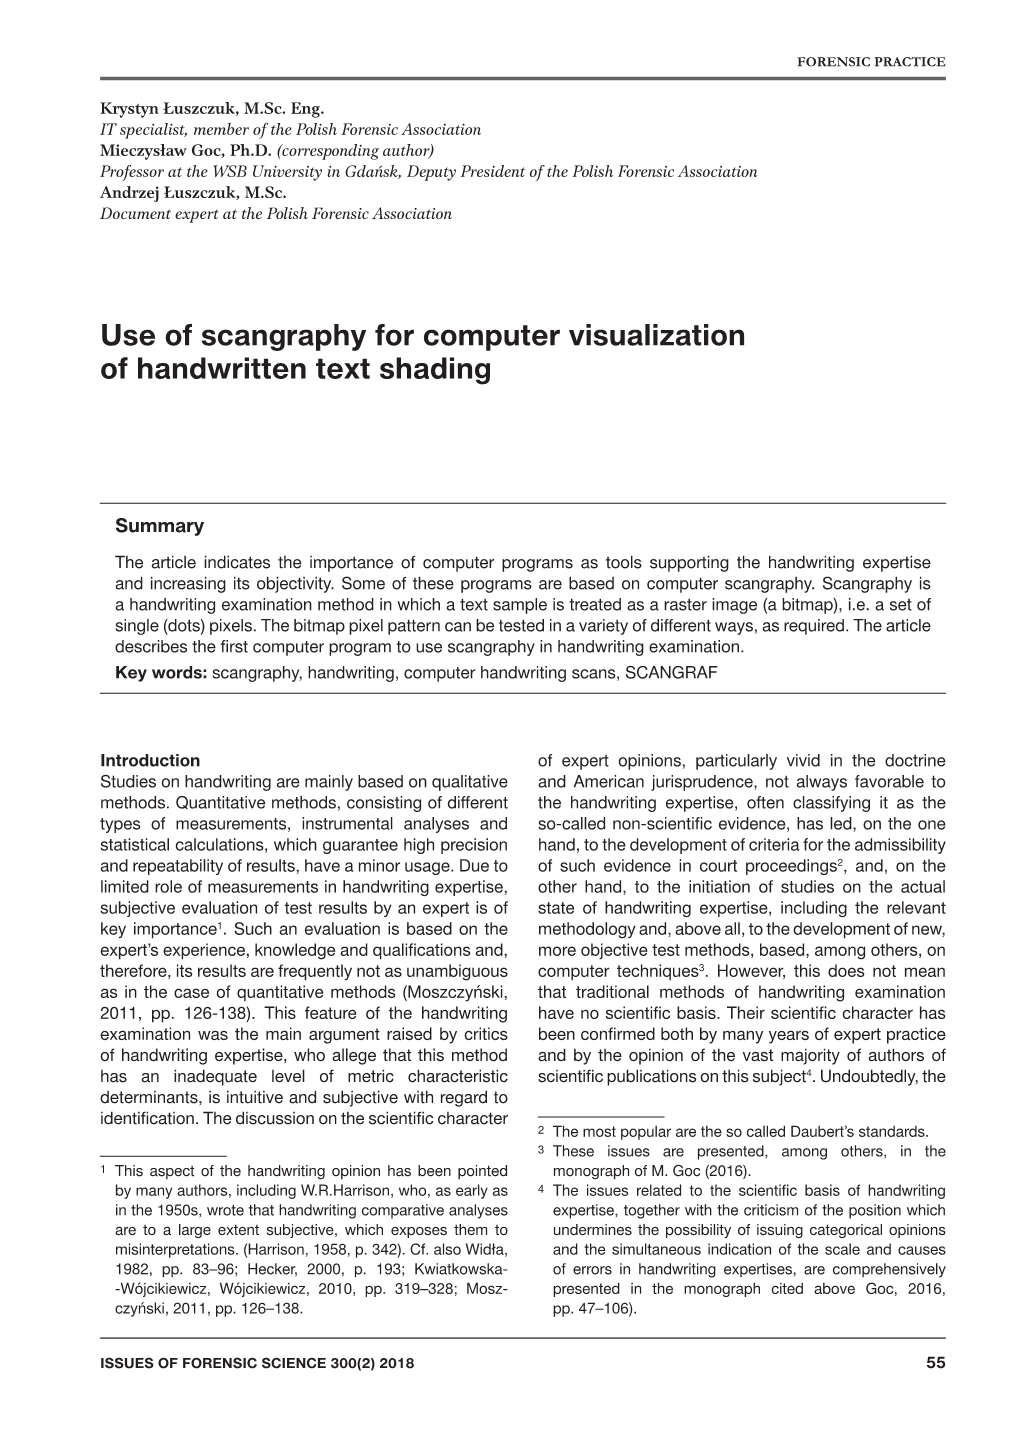 Use of Scangraphy for Computer Visualization of Handwritten Text Shading